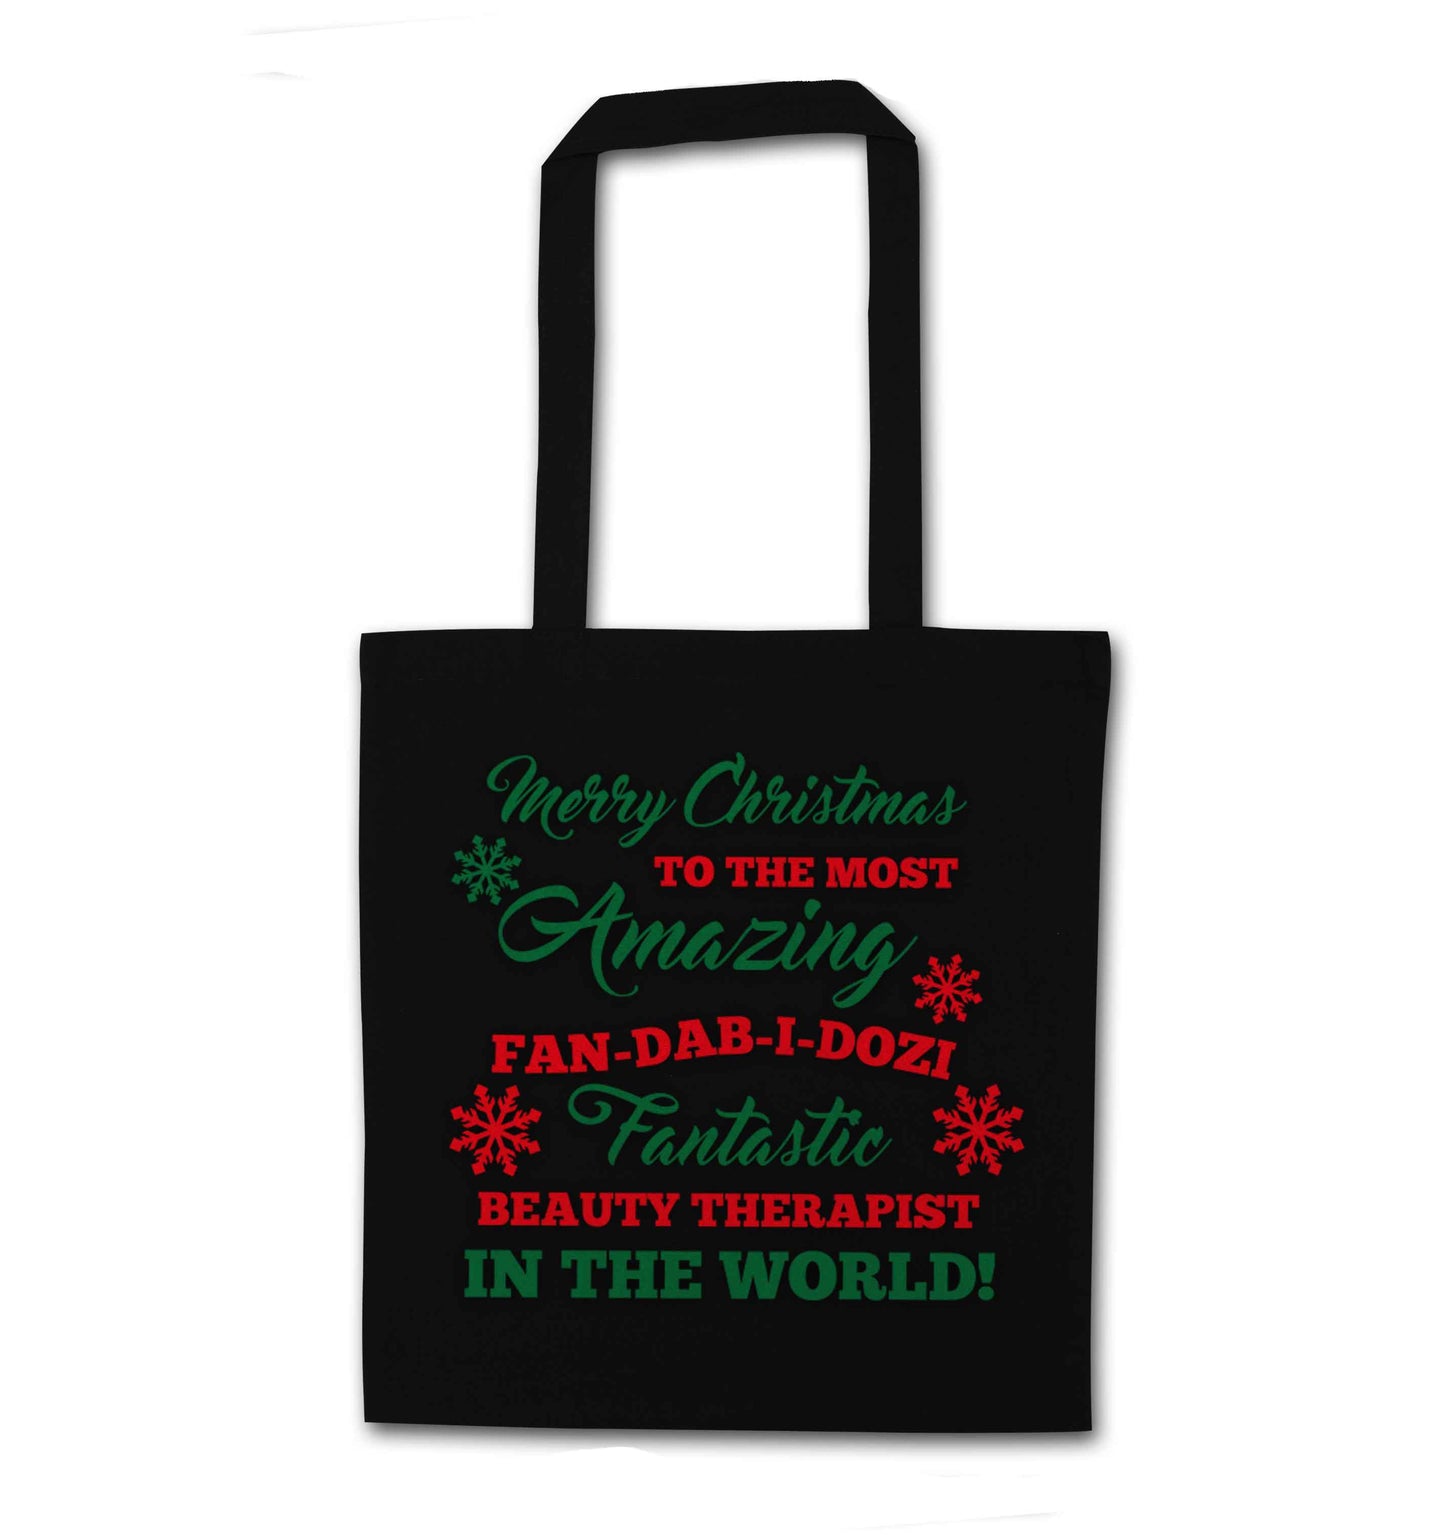 Merry Christmas to the most amazing fan-dab-i-dozi fantasic beauty therapist in the world black tote bag